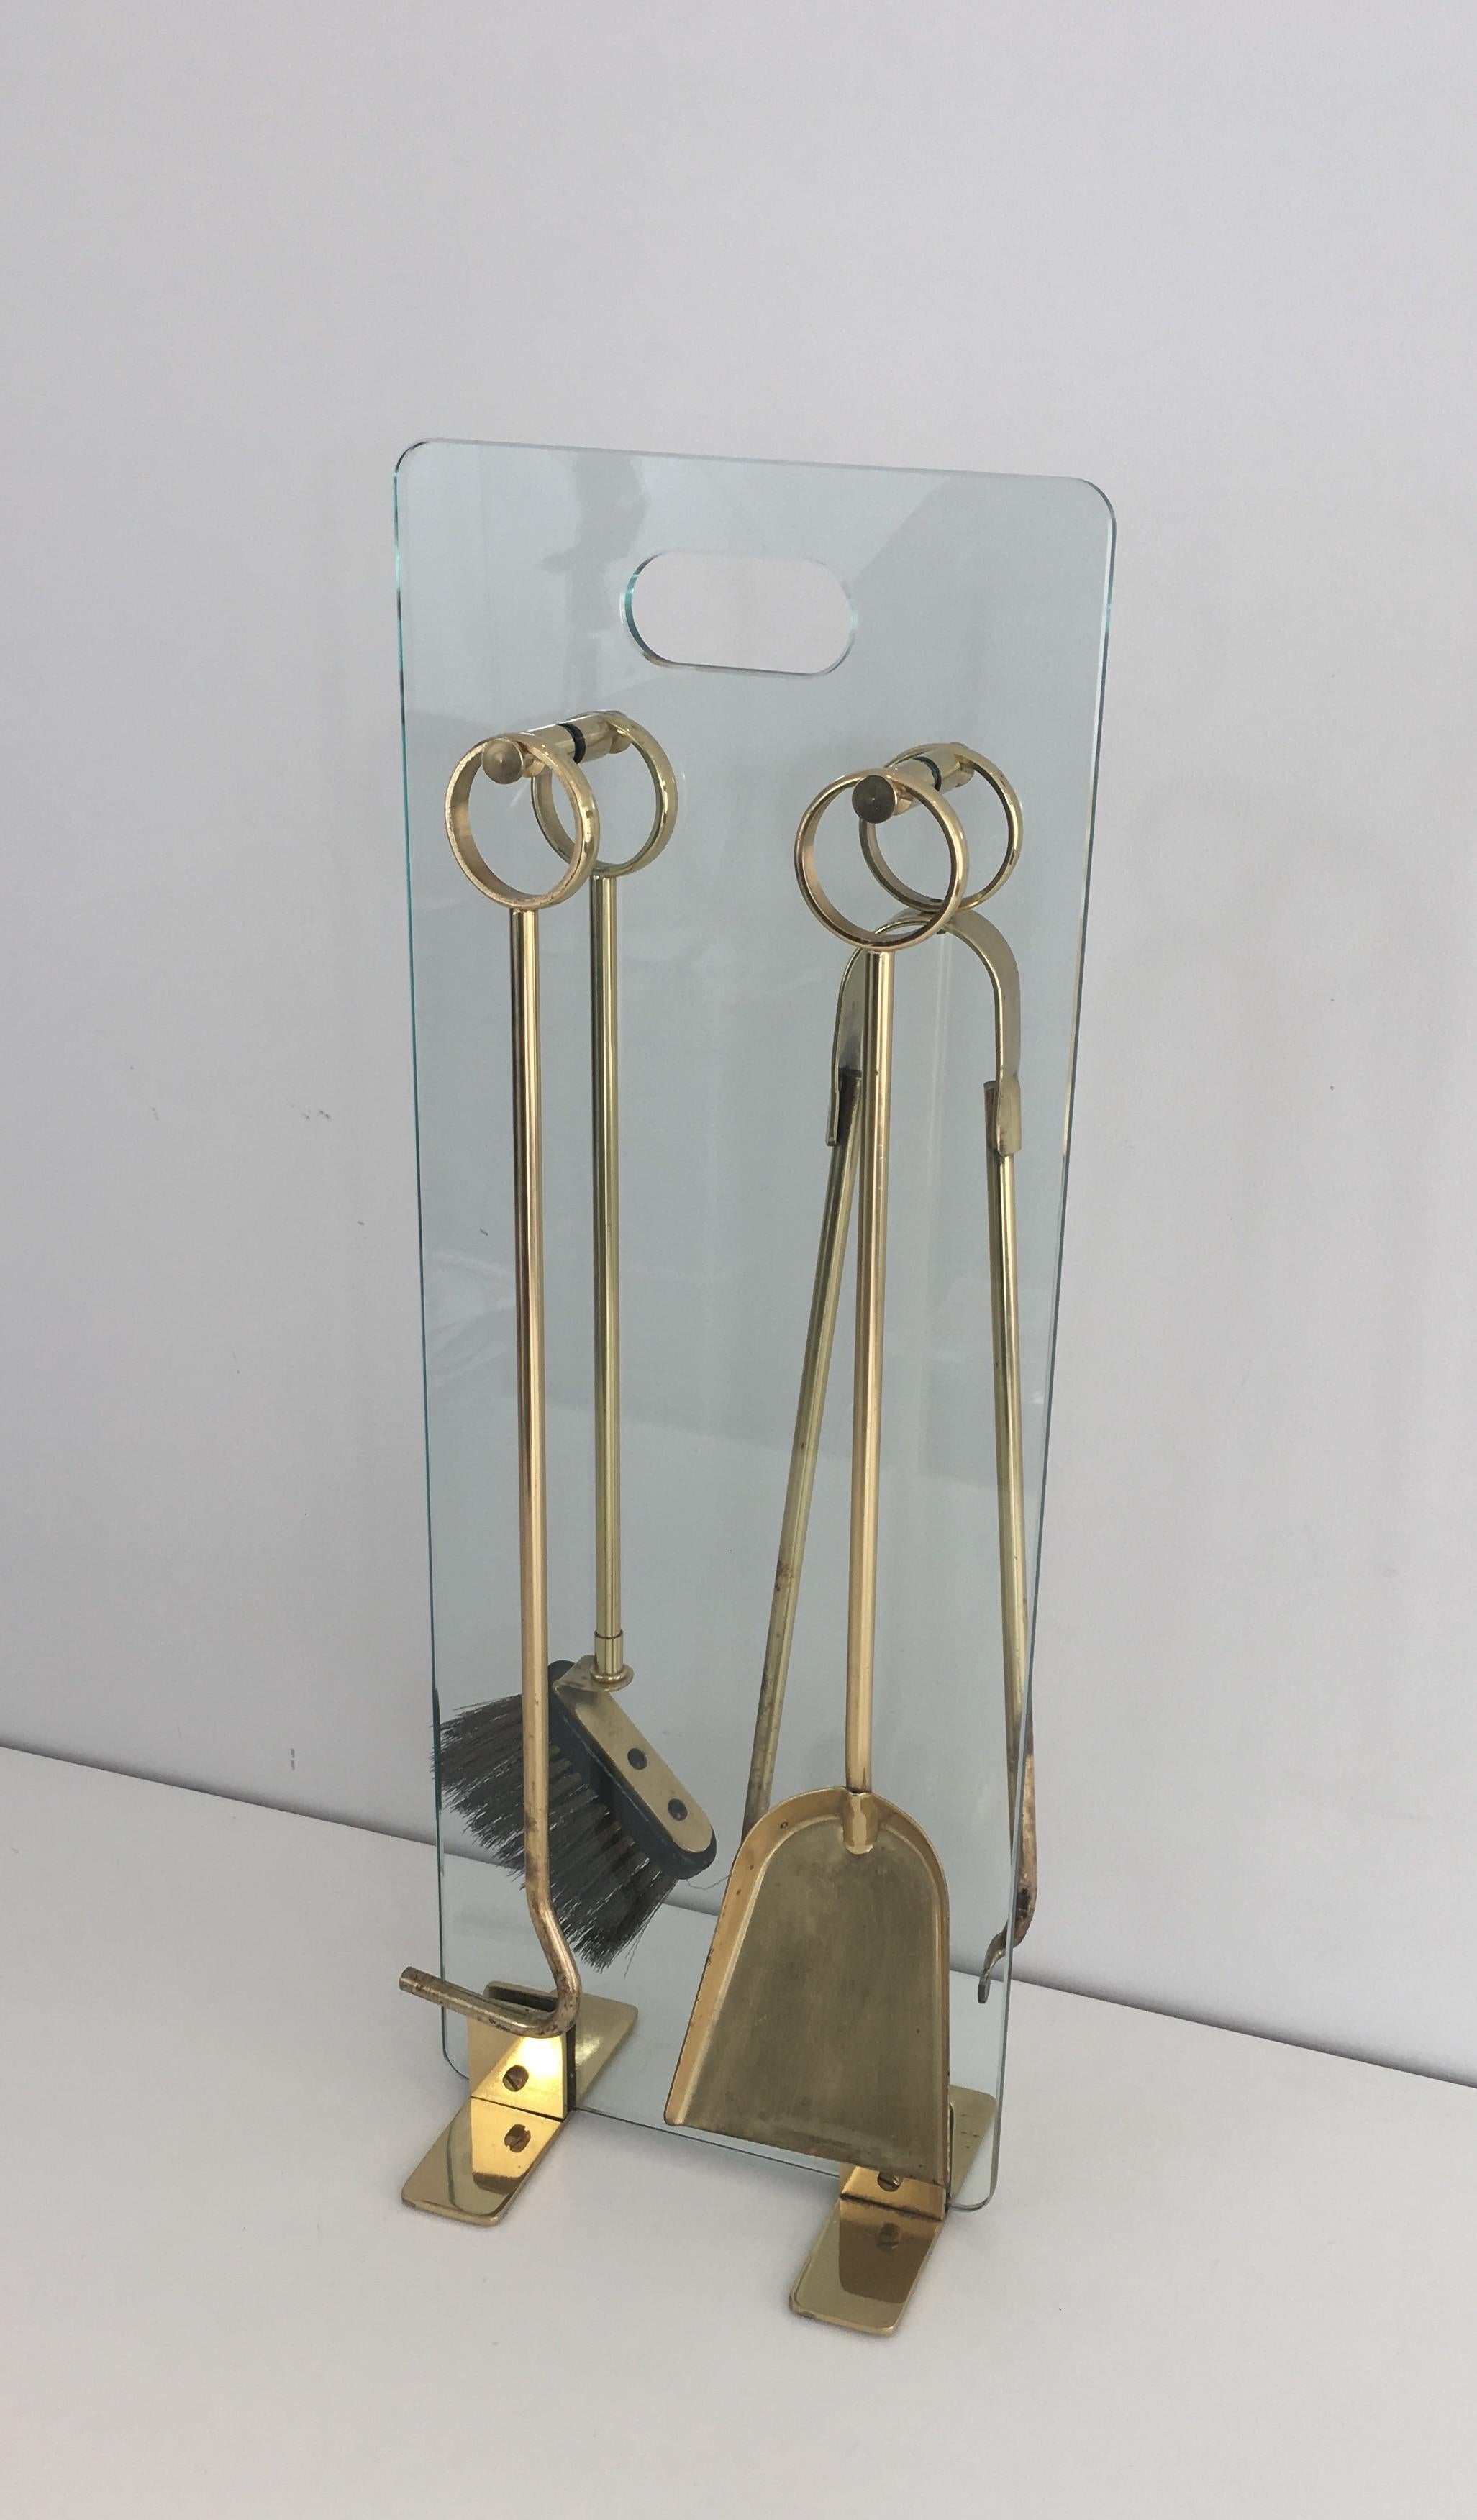 This fire place tools are made of brass on a brass and tempered glass stand. Thids is a French work, circa 1970.